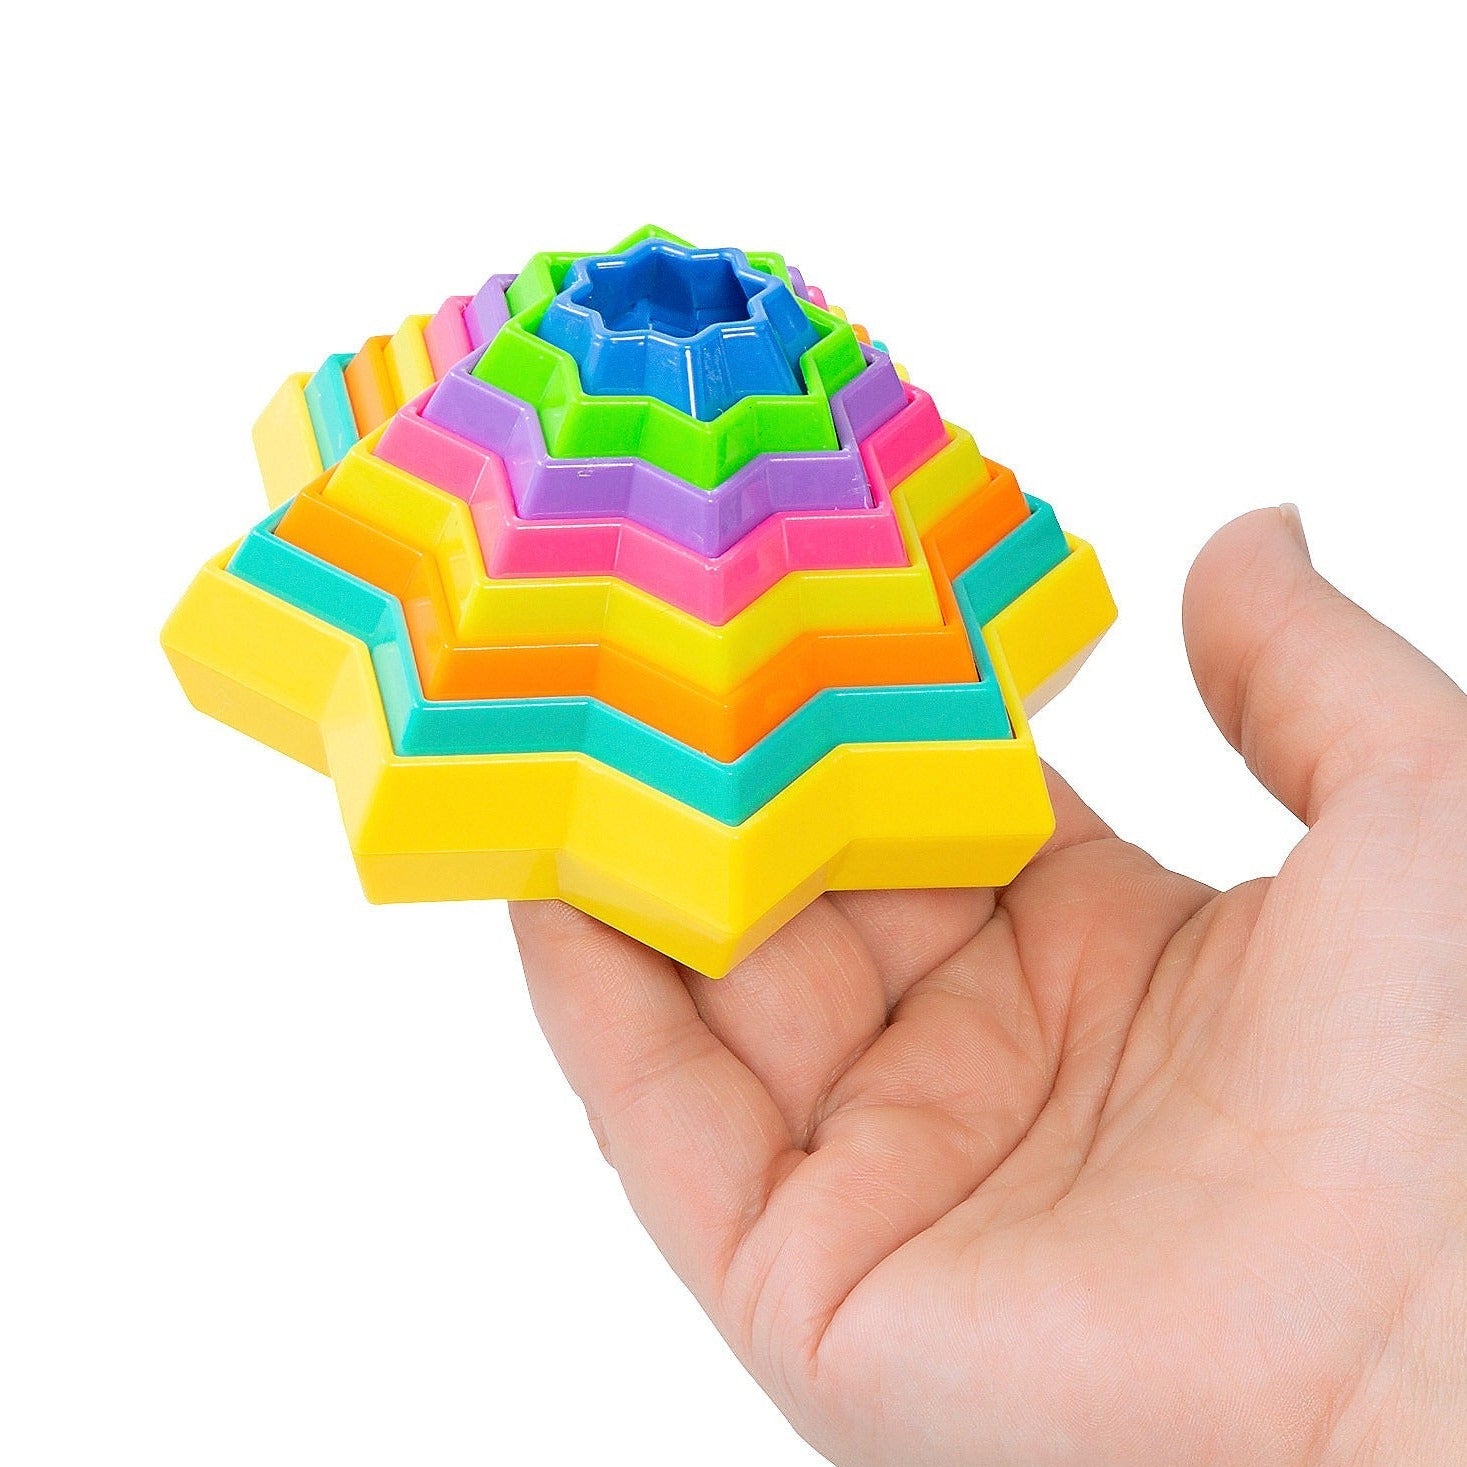 Magic Star Fidget Toy, The incredibly addictive Magic Fidget Star fidget toy folds out into a 3D pyramid shape, listen to it popping and cracking while you play with it! Magic Star Fidget Toy Product features Incredibly addictive fold-out star with popping noises and ridged design Designed to feel comfortable in the hand Suitable for ages 3 years + Colours vary and will be picked at random atthe point of despatch., Magic Star Fidget Toy,Magic Sensory Fidget Star,Fidget Star,Sensorydirect fidget toy discount